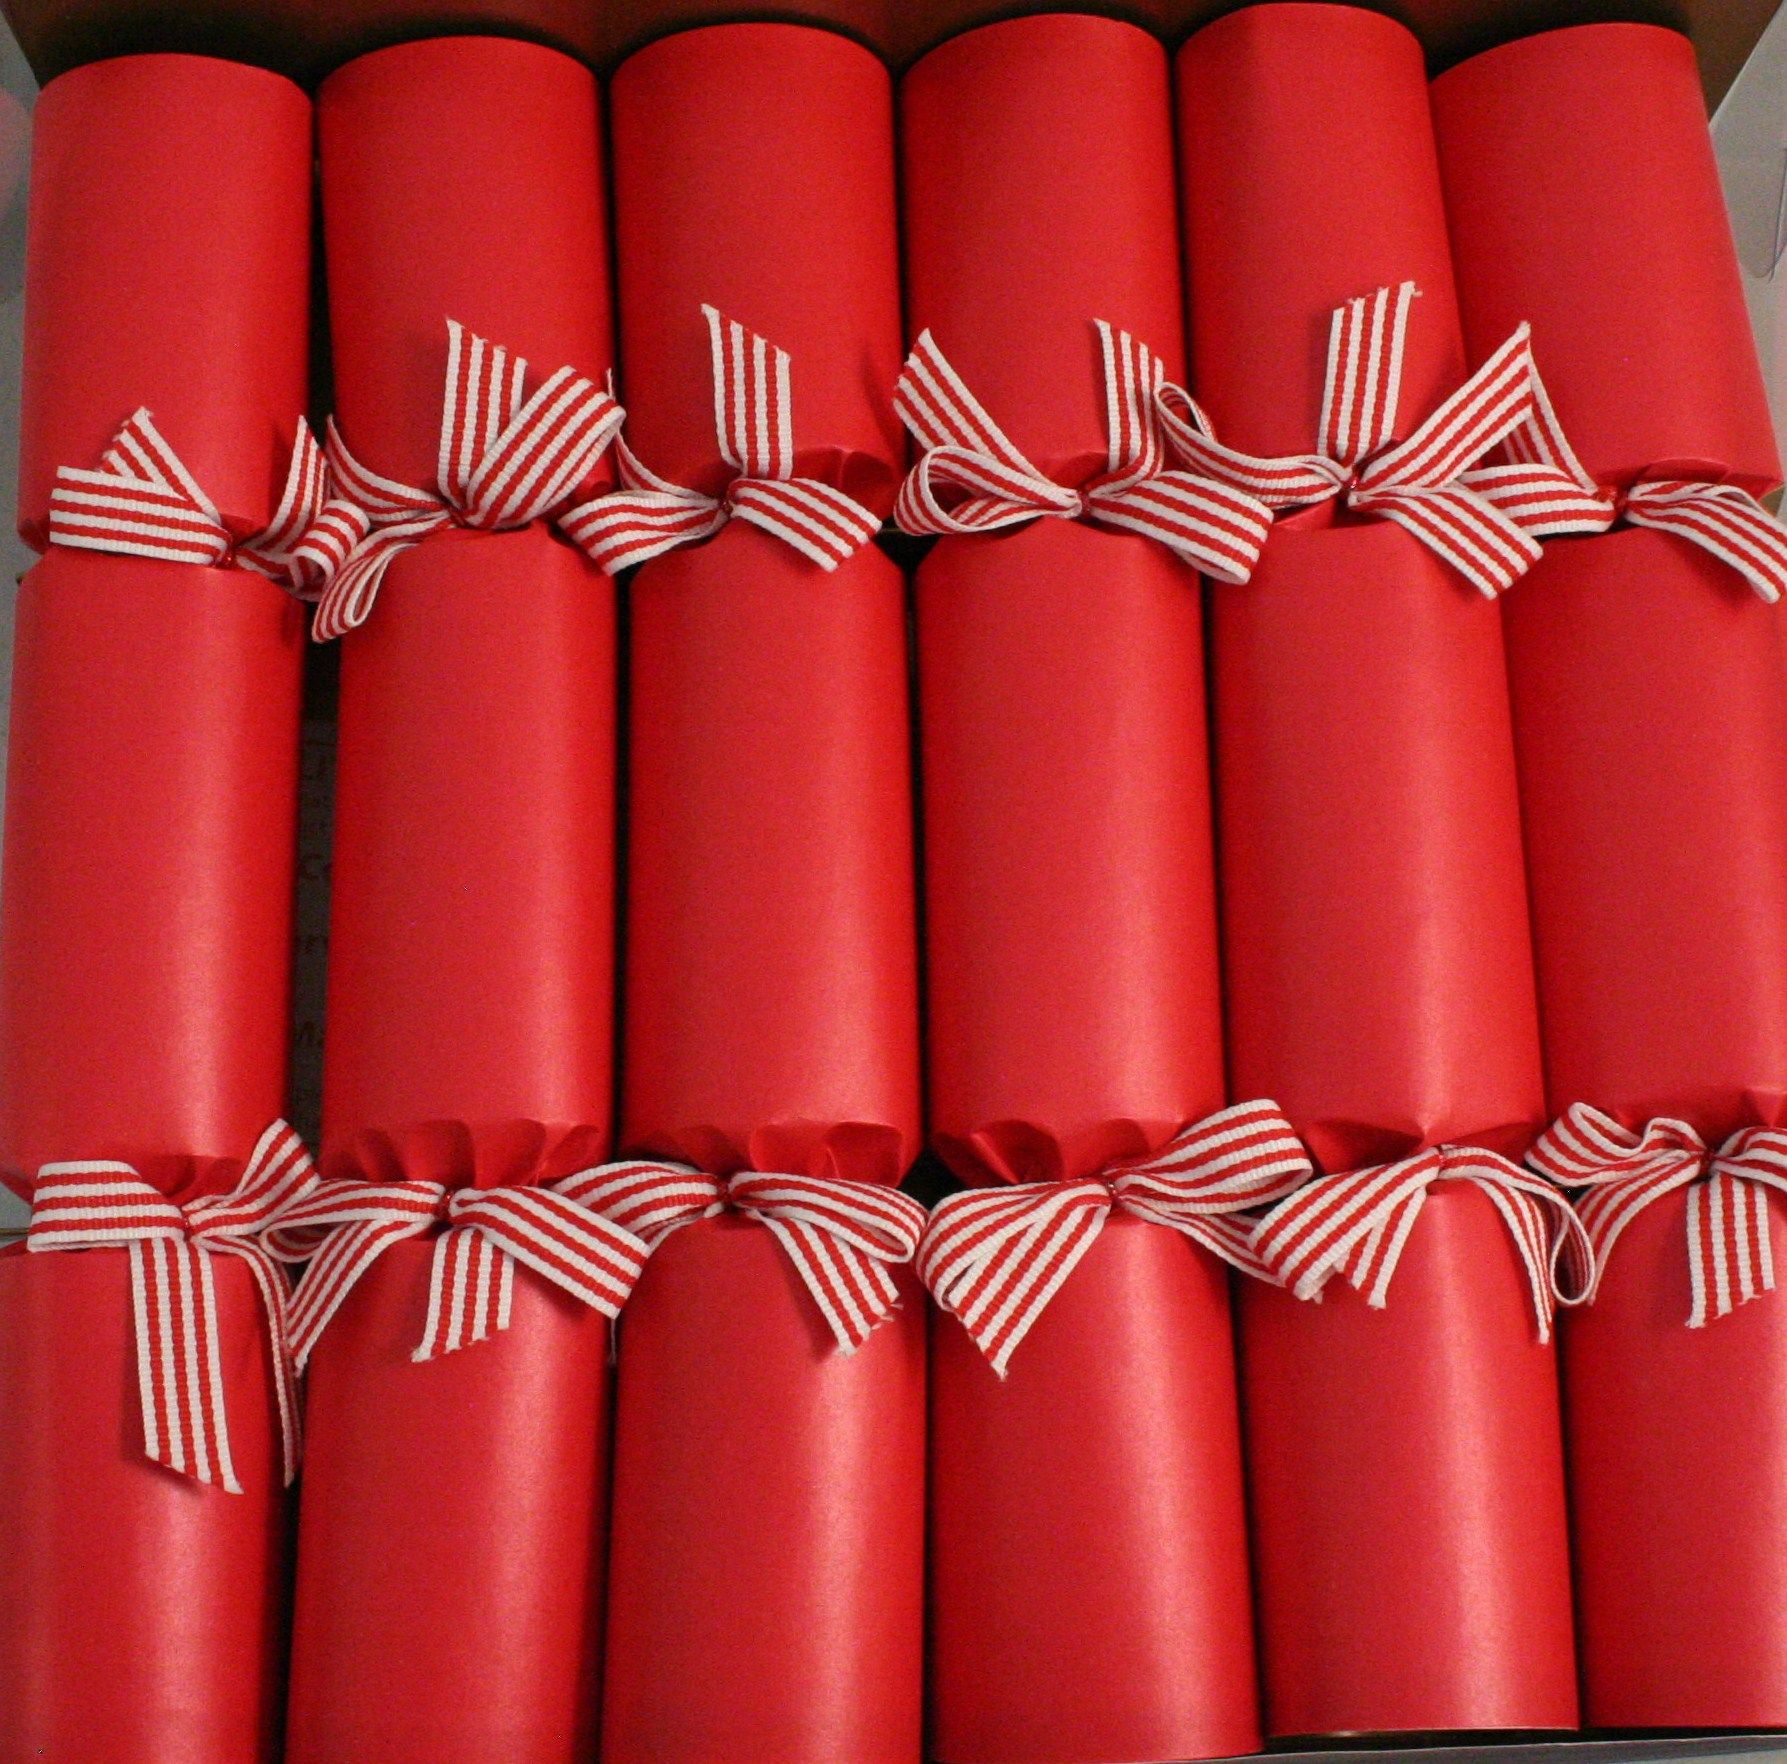  Holiday Traditional English Christmas Crackers RED&WHITE GROSGRAIN